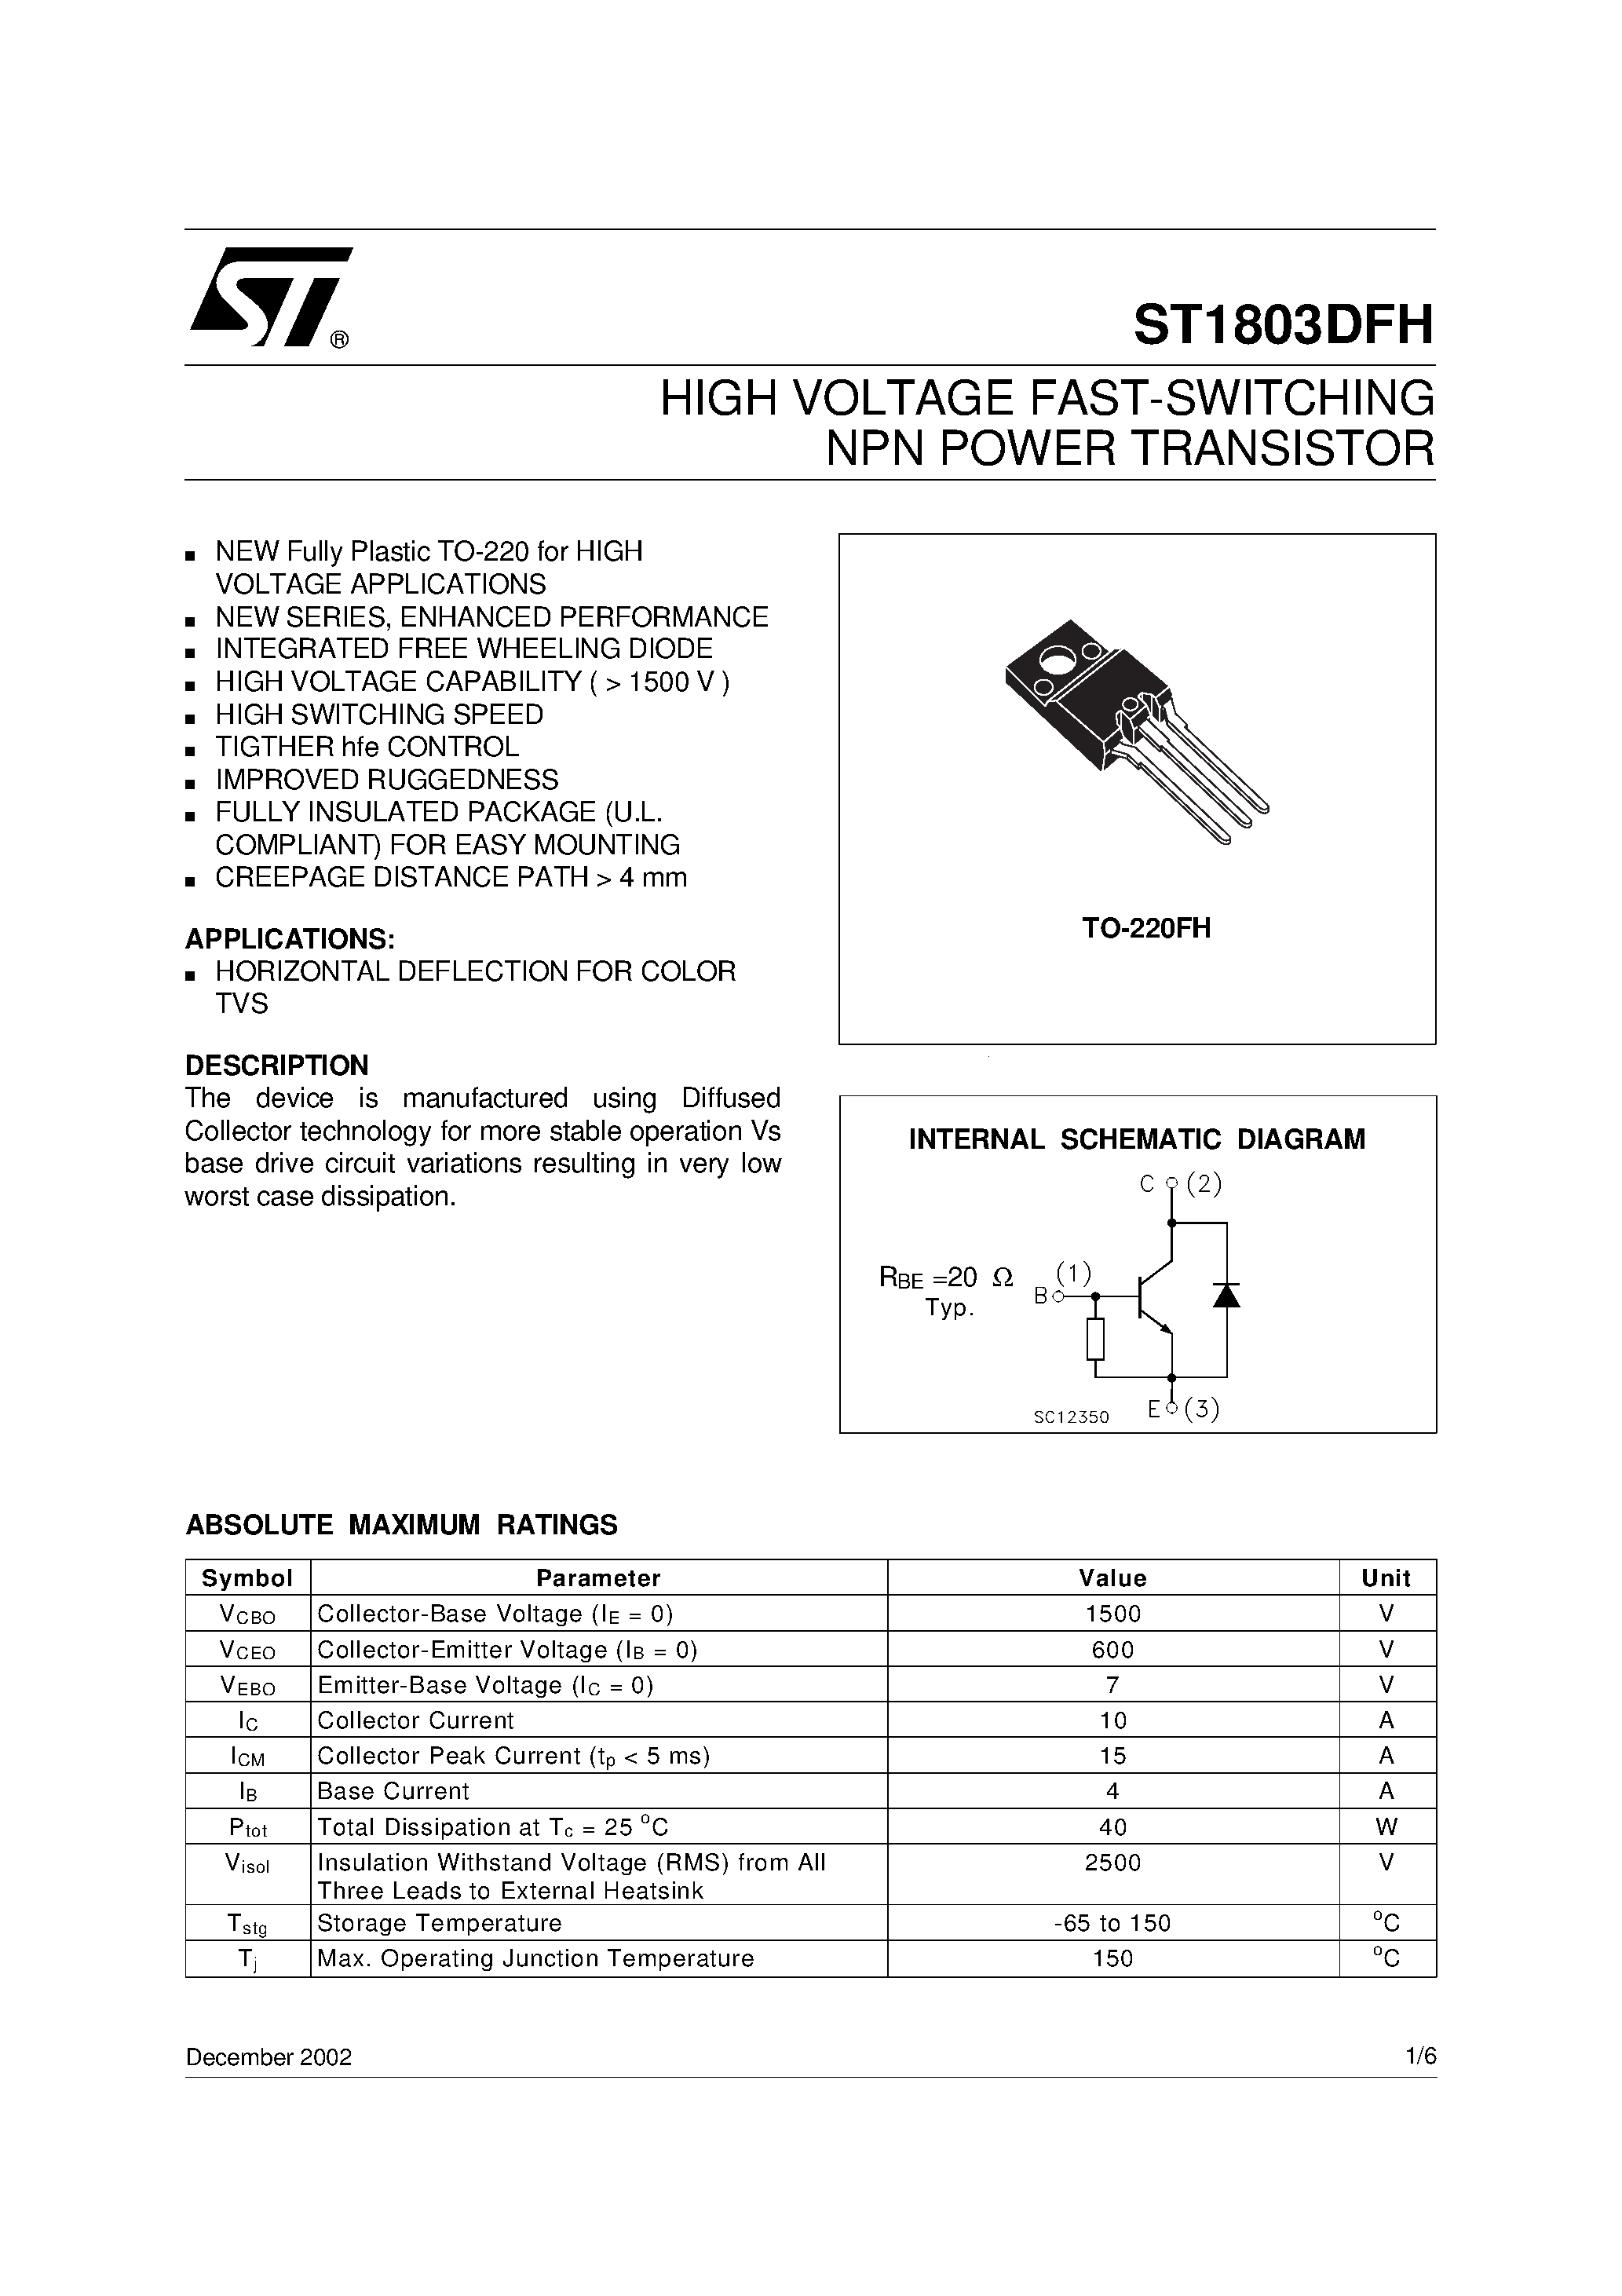 Даташит ST1803DFH - HIGH VOLTAGE FAST-SWITCHING NPN POWER TRANSISTOR страница 1